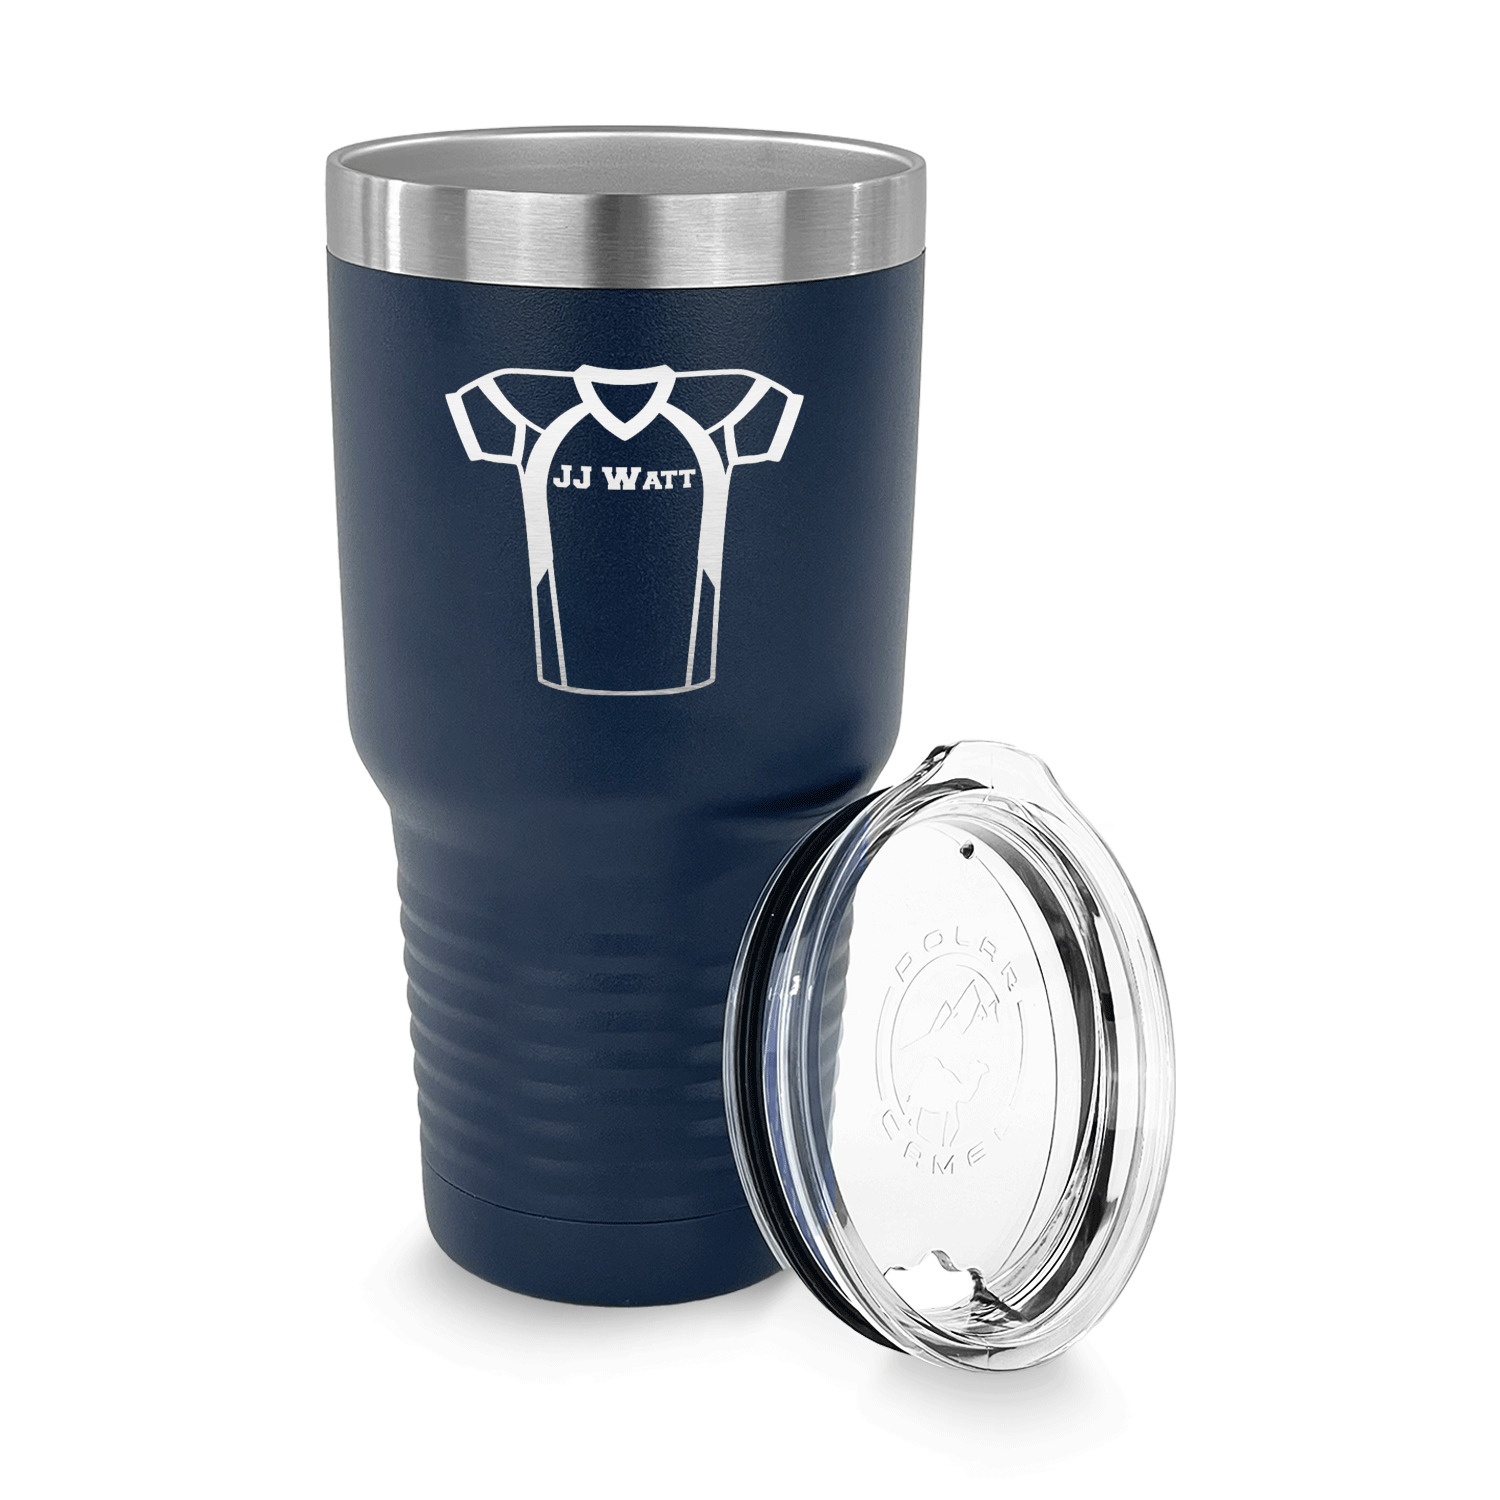 https://www.youcustomizeit.com/common/MAKE/475292/Football-Jersey-30-oz-Stainless-Steel-Ringneck-Tumblers-Navy-LID-OFF.jpg?lm=1633731434